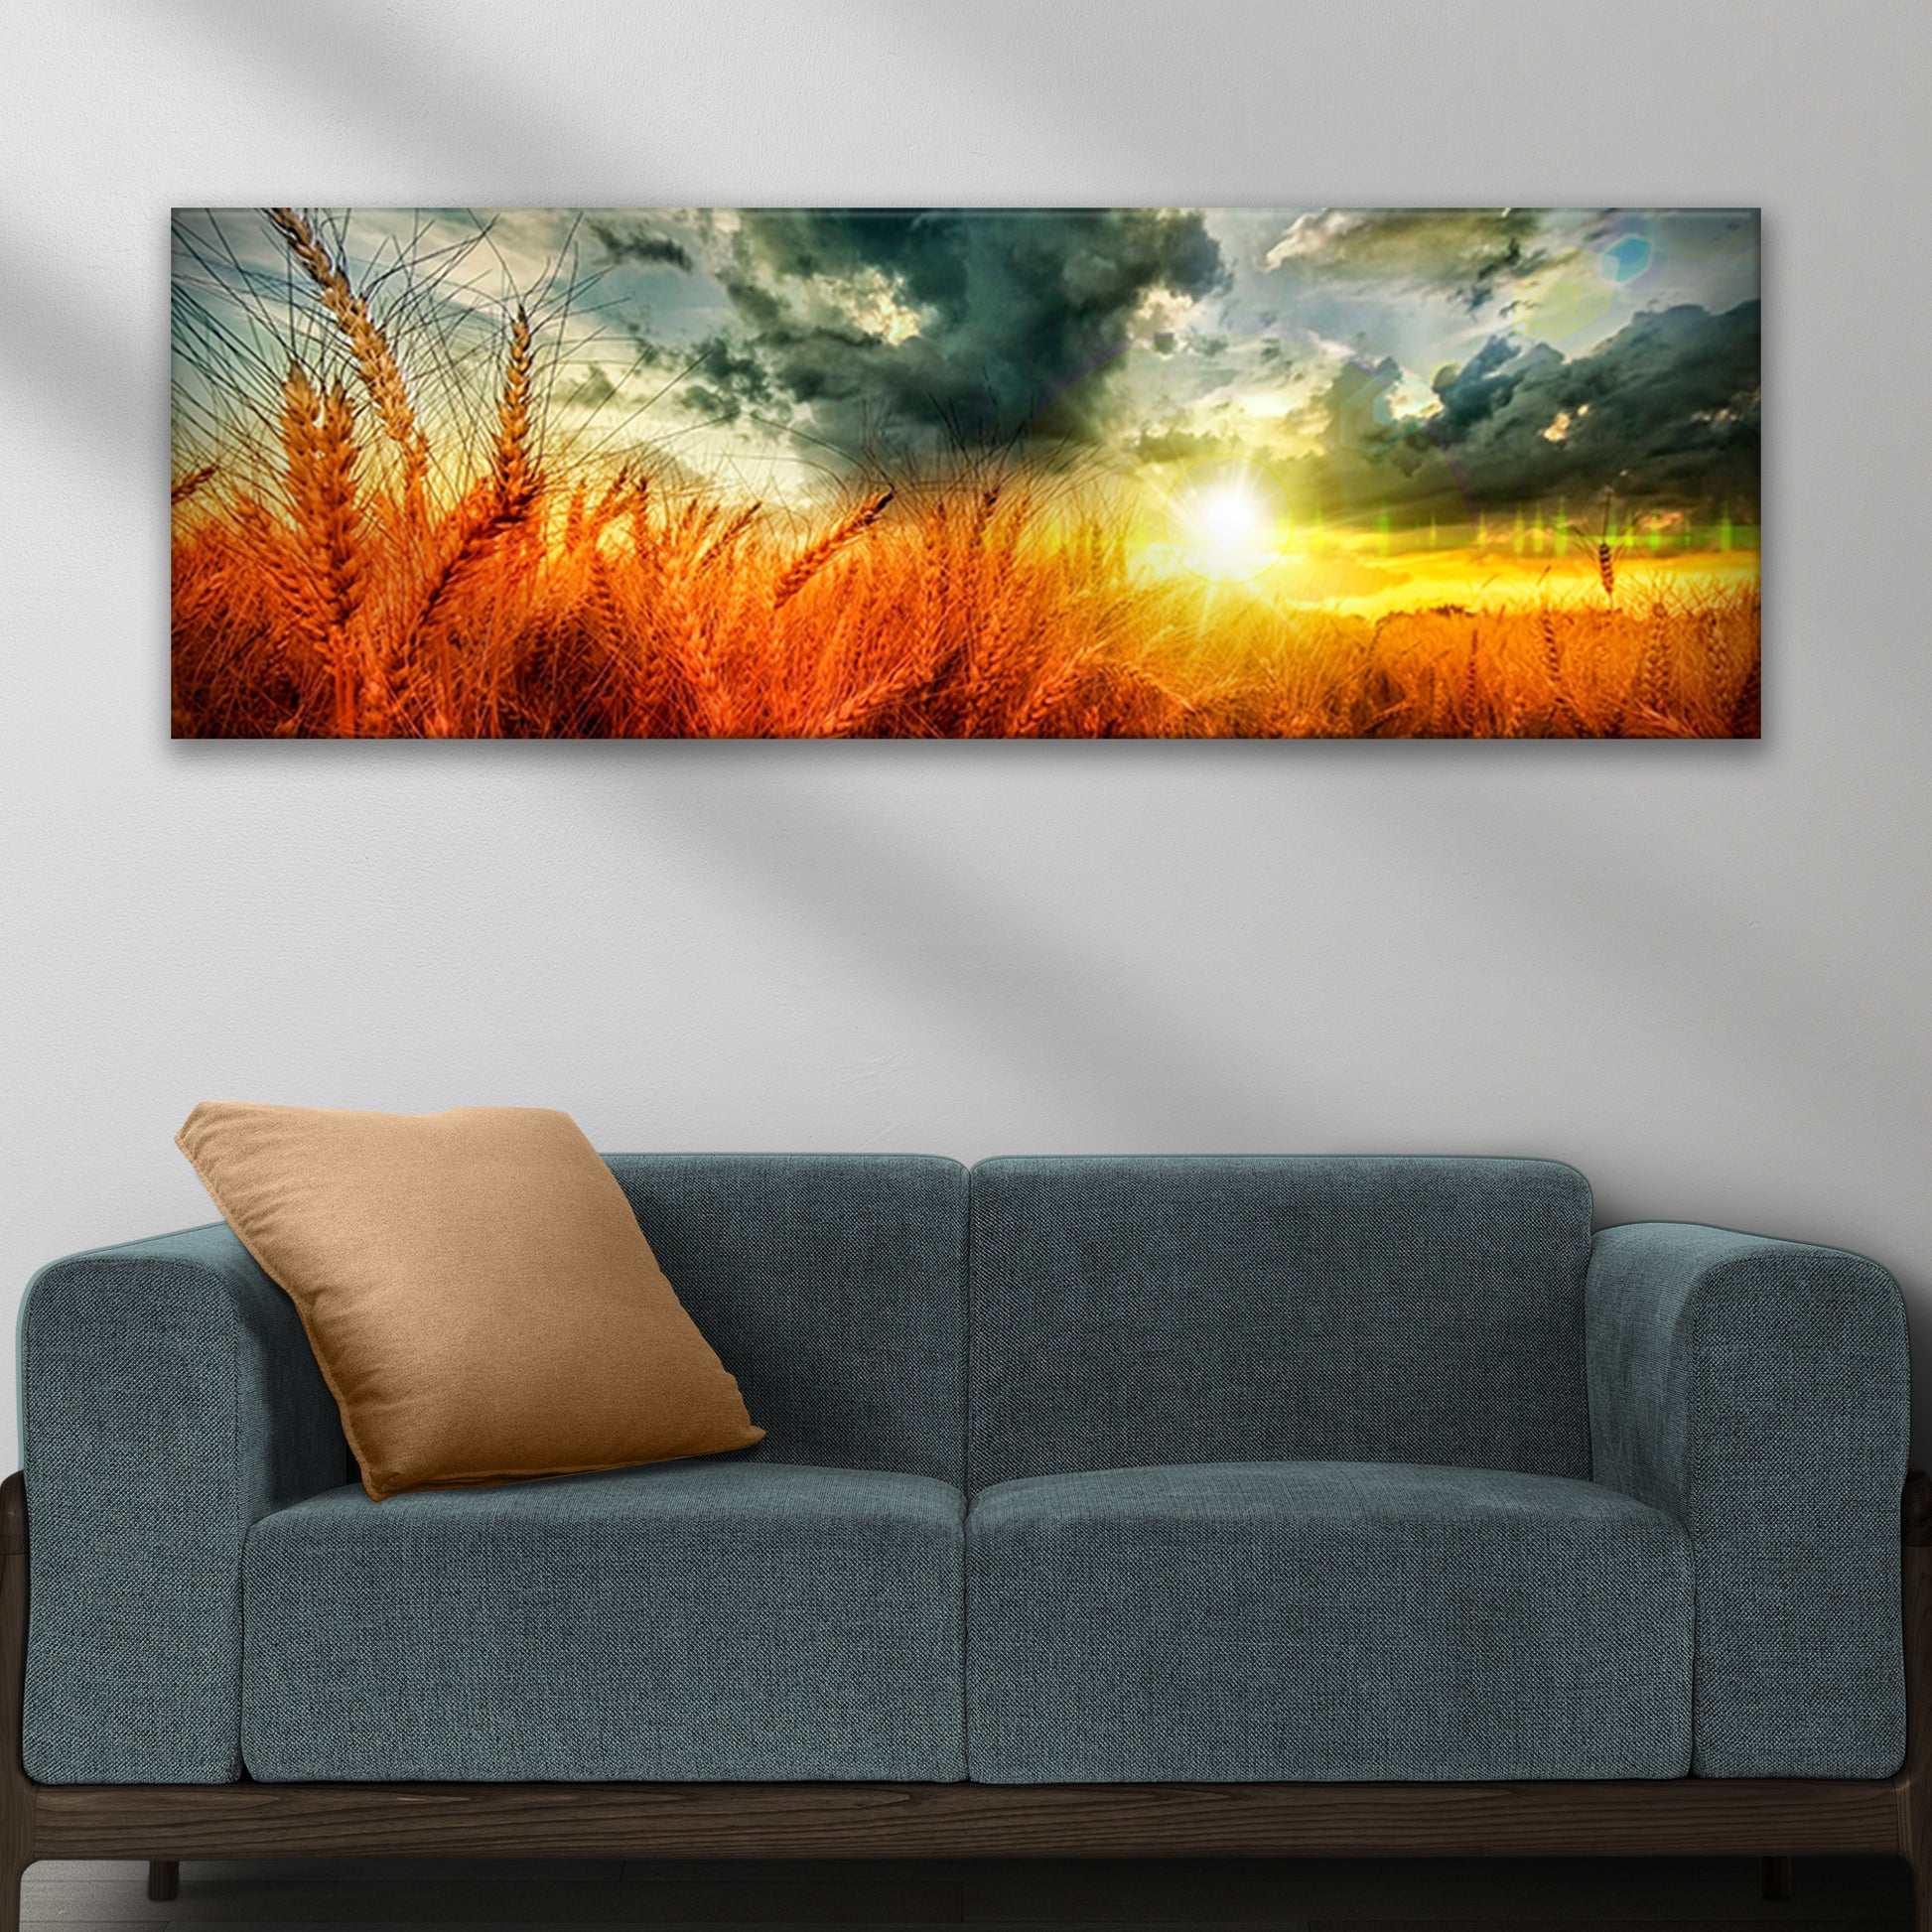 Dusk Falls On The Wheat Field Canvas Wall Art - Image by Tailored Canvases